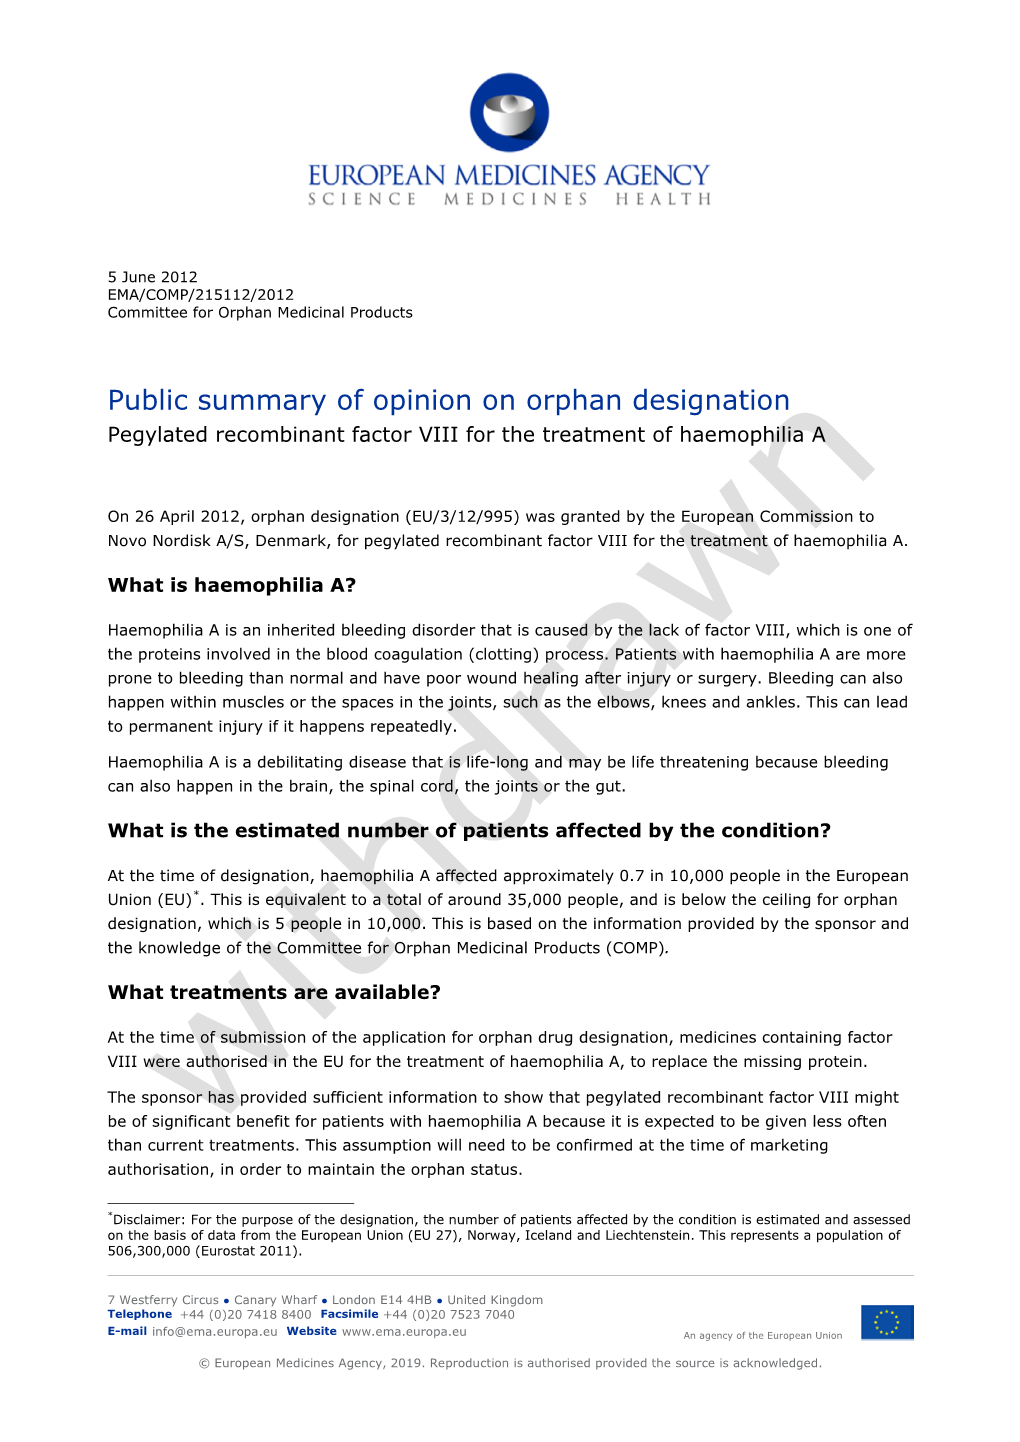 Public Summary of Opinion on Orphan Designation Pegylated Recombinant Factor VIII for the Treatment of Haemophilia A